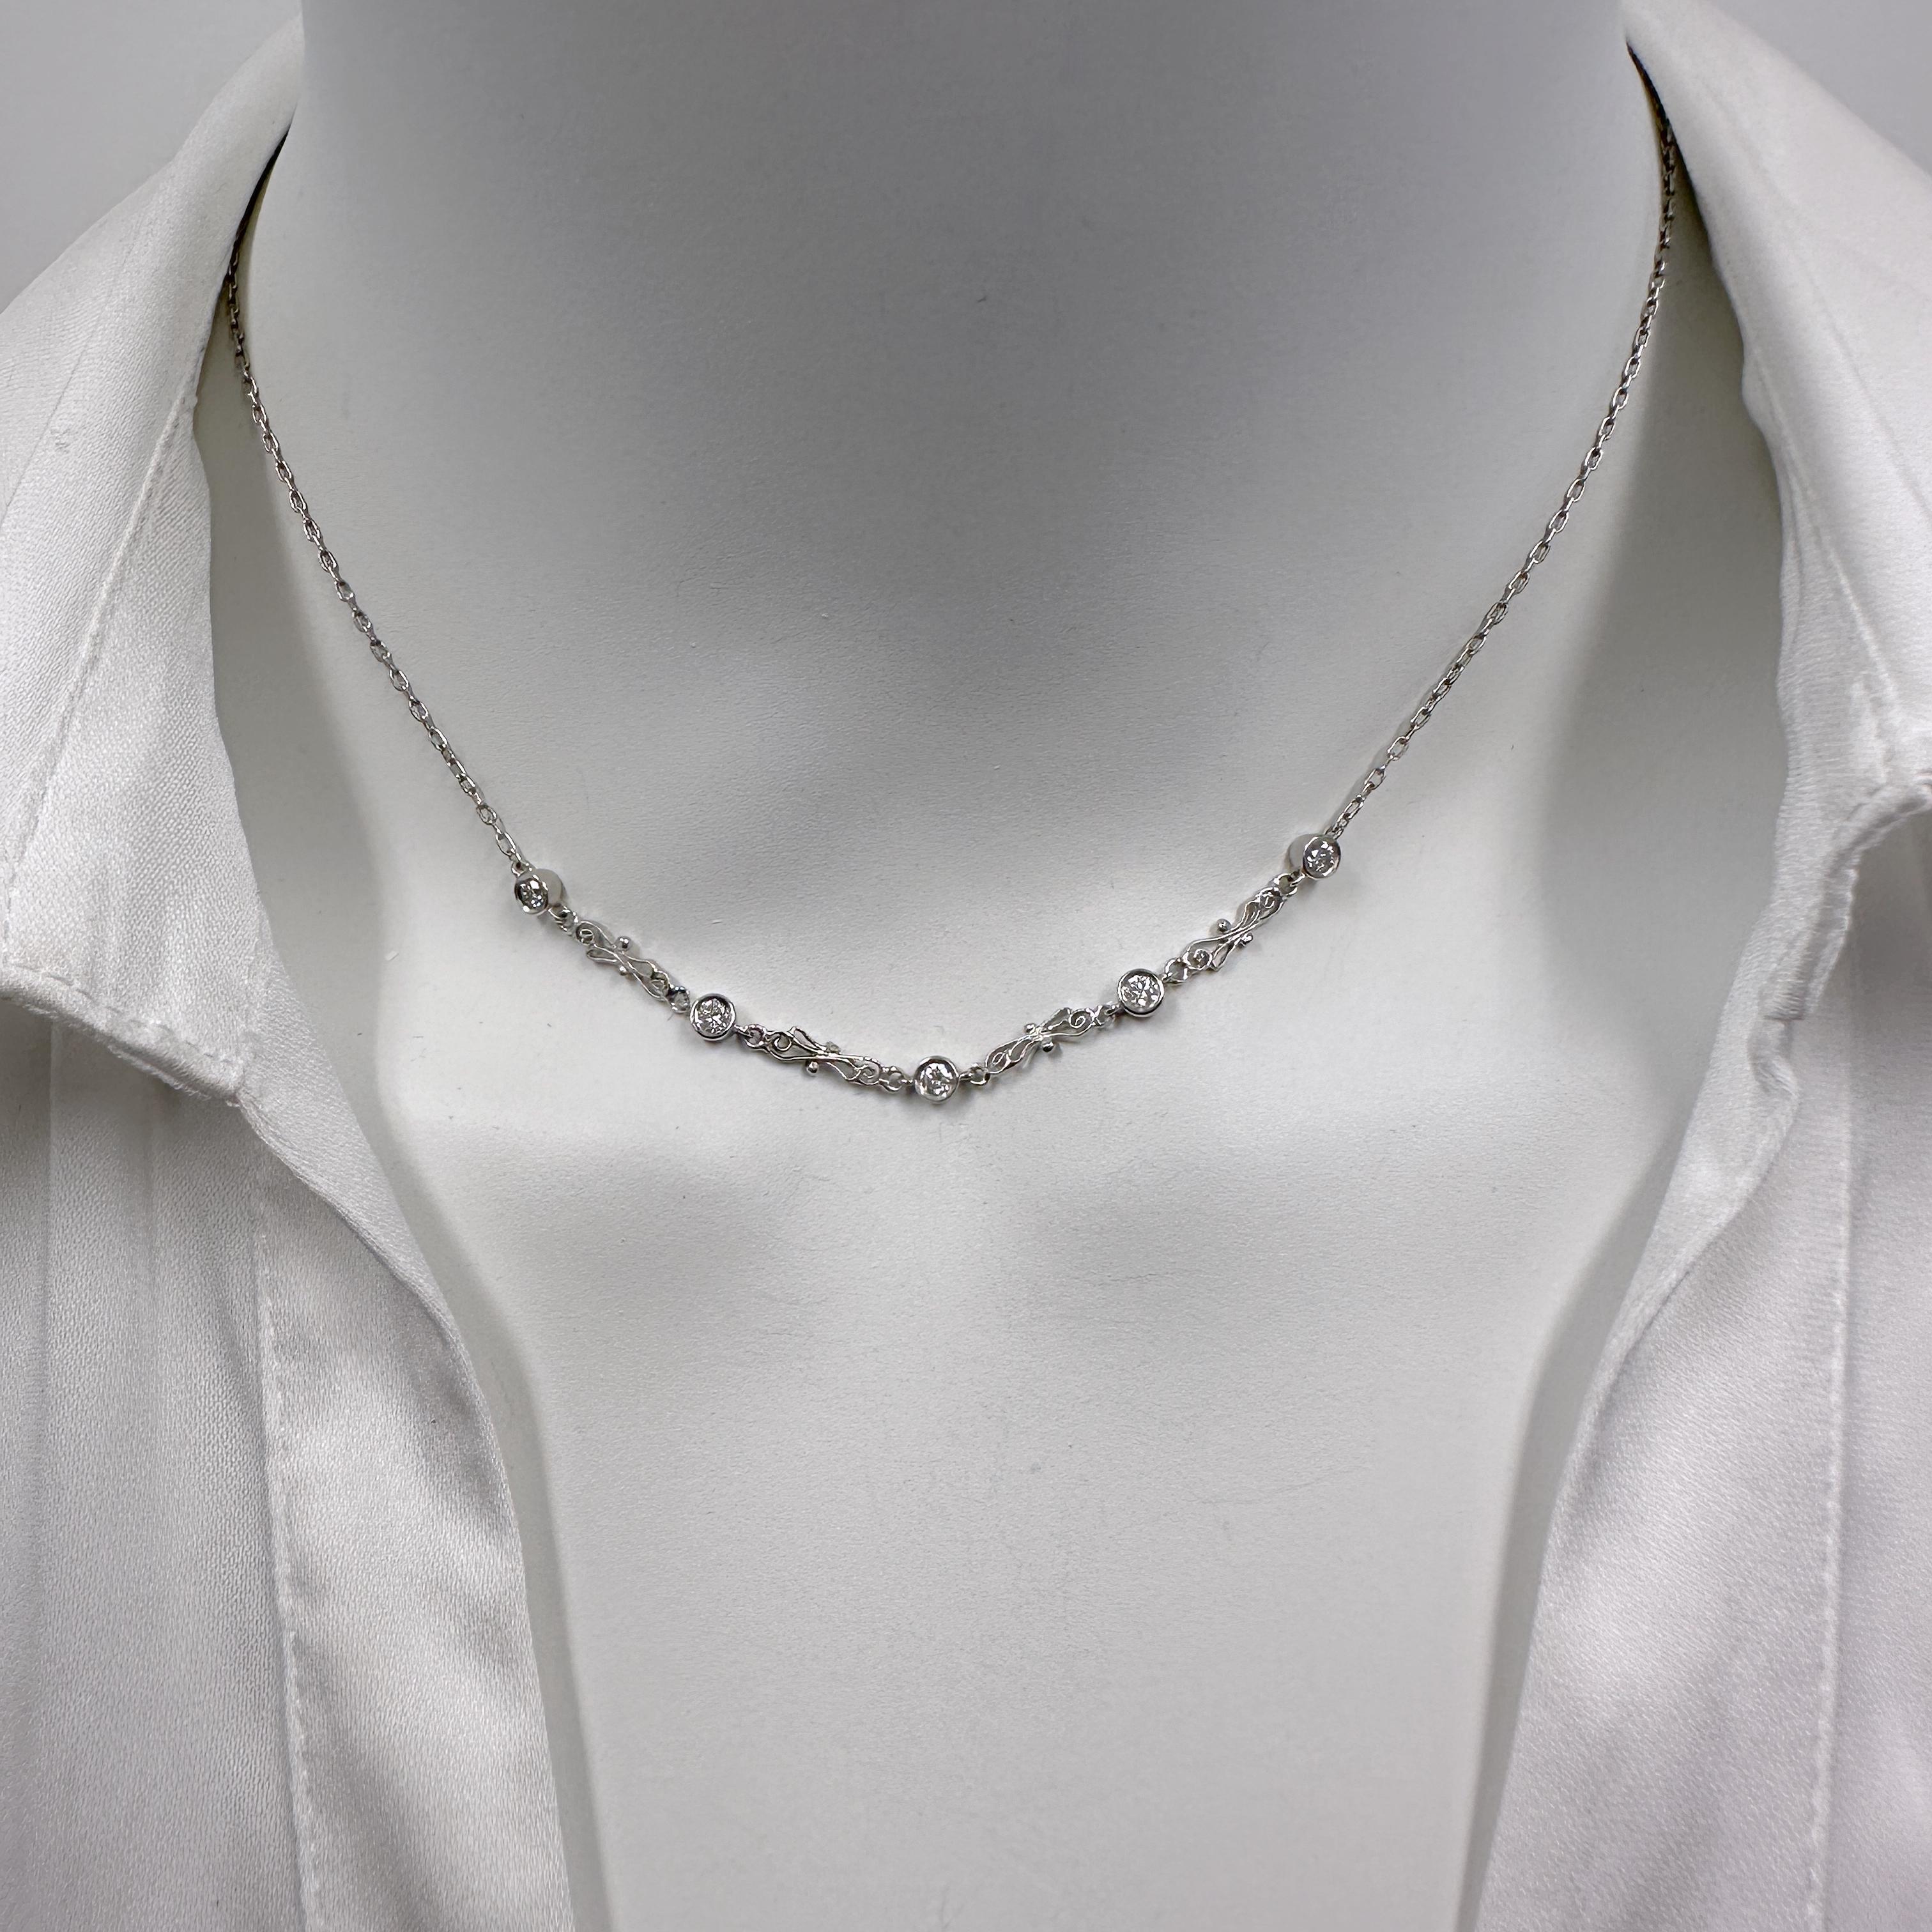 This lovely necklace is assembled from an antique platinum chain plus some very nice 